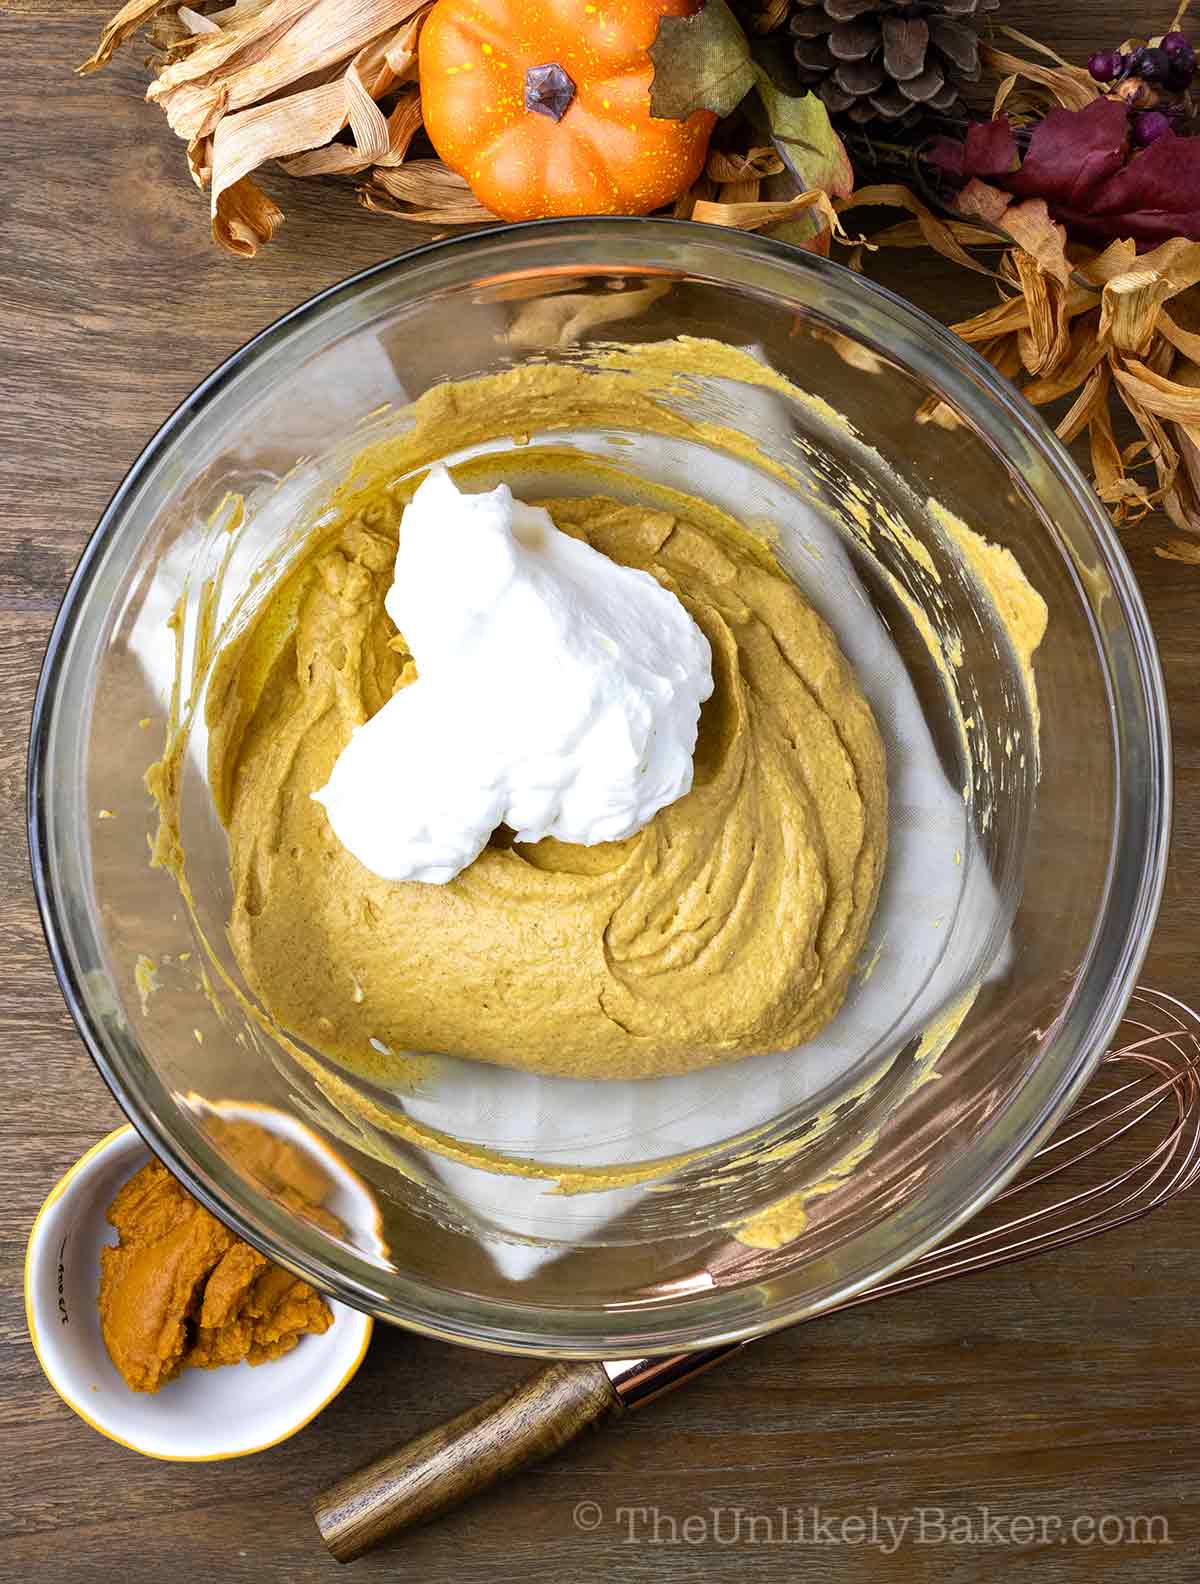 Whipped cream added to pumpkin mixture.